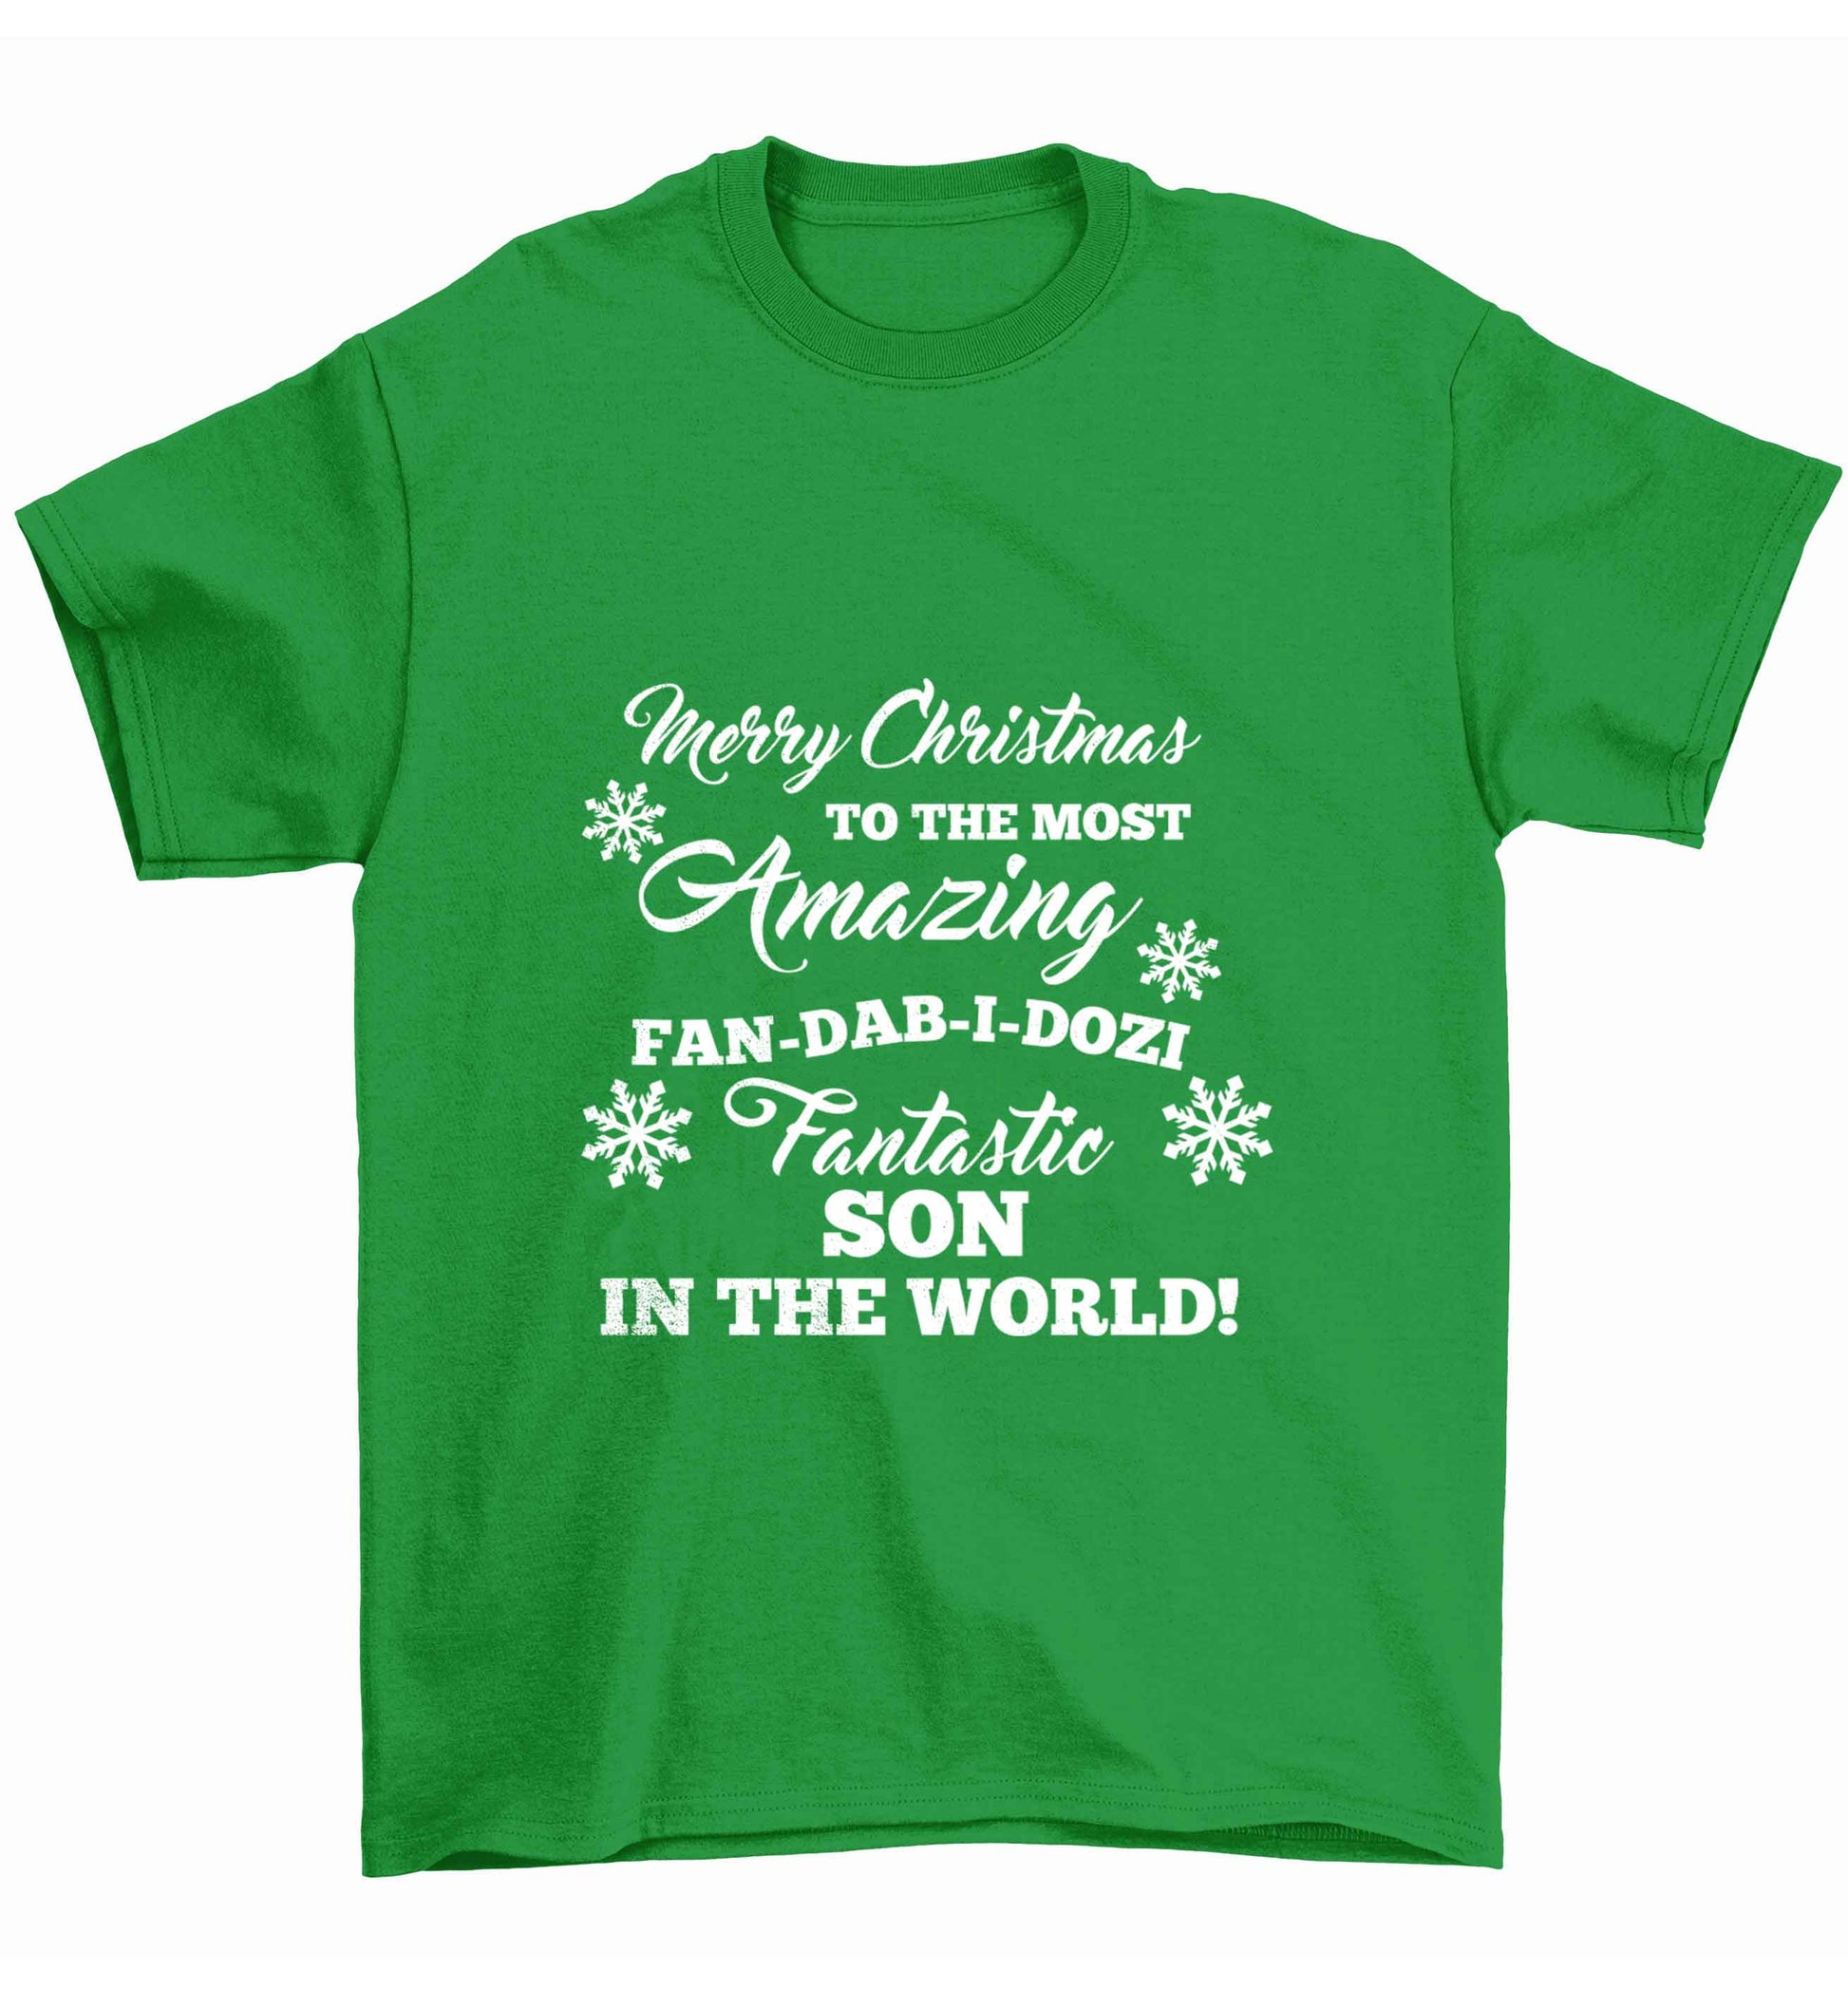 Merry Christmas to the most amazing fan-dab-i-dozi fantasic Son in the world Children's green Tshirt 12-13 Years